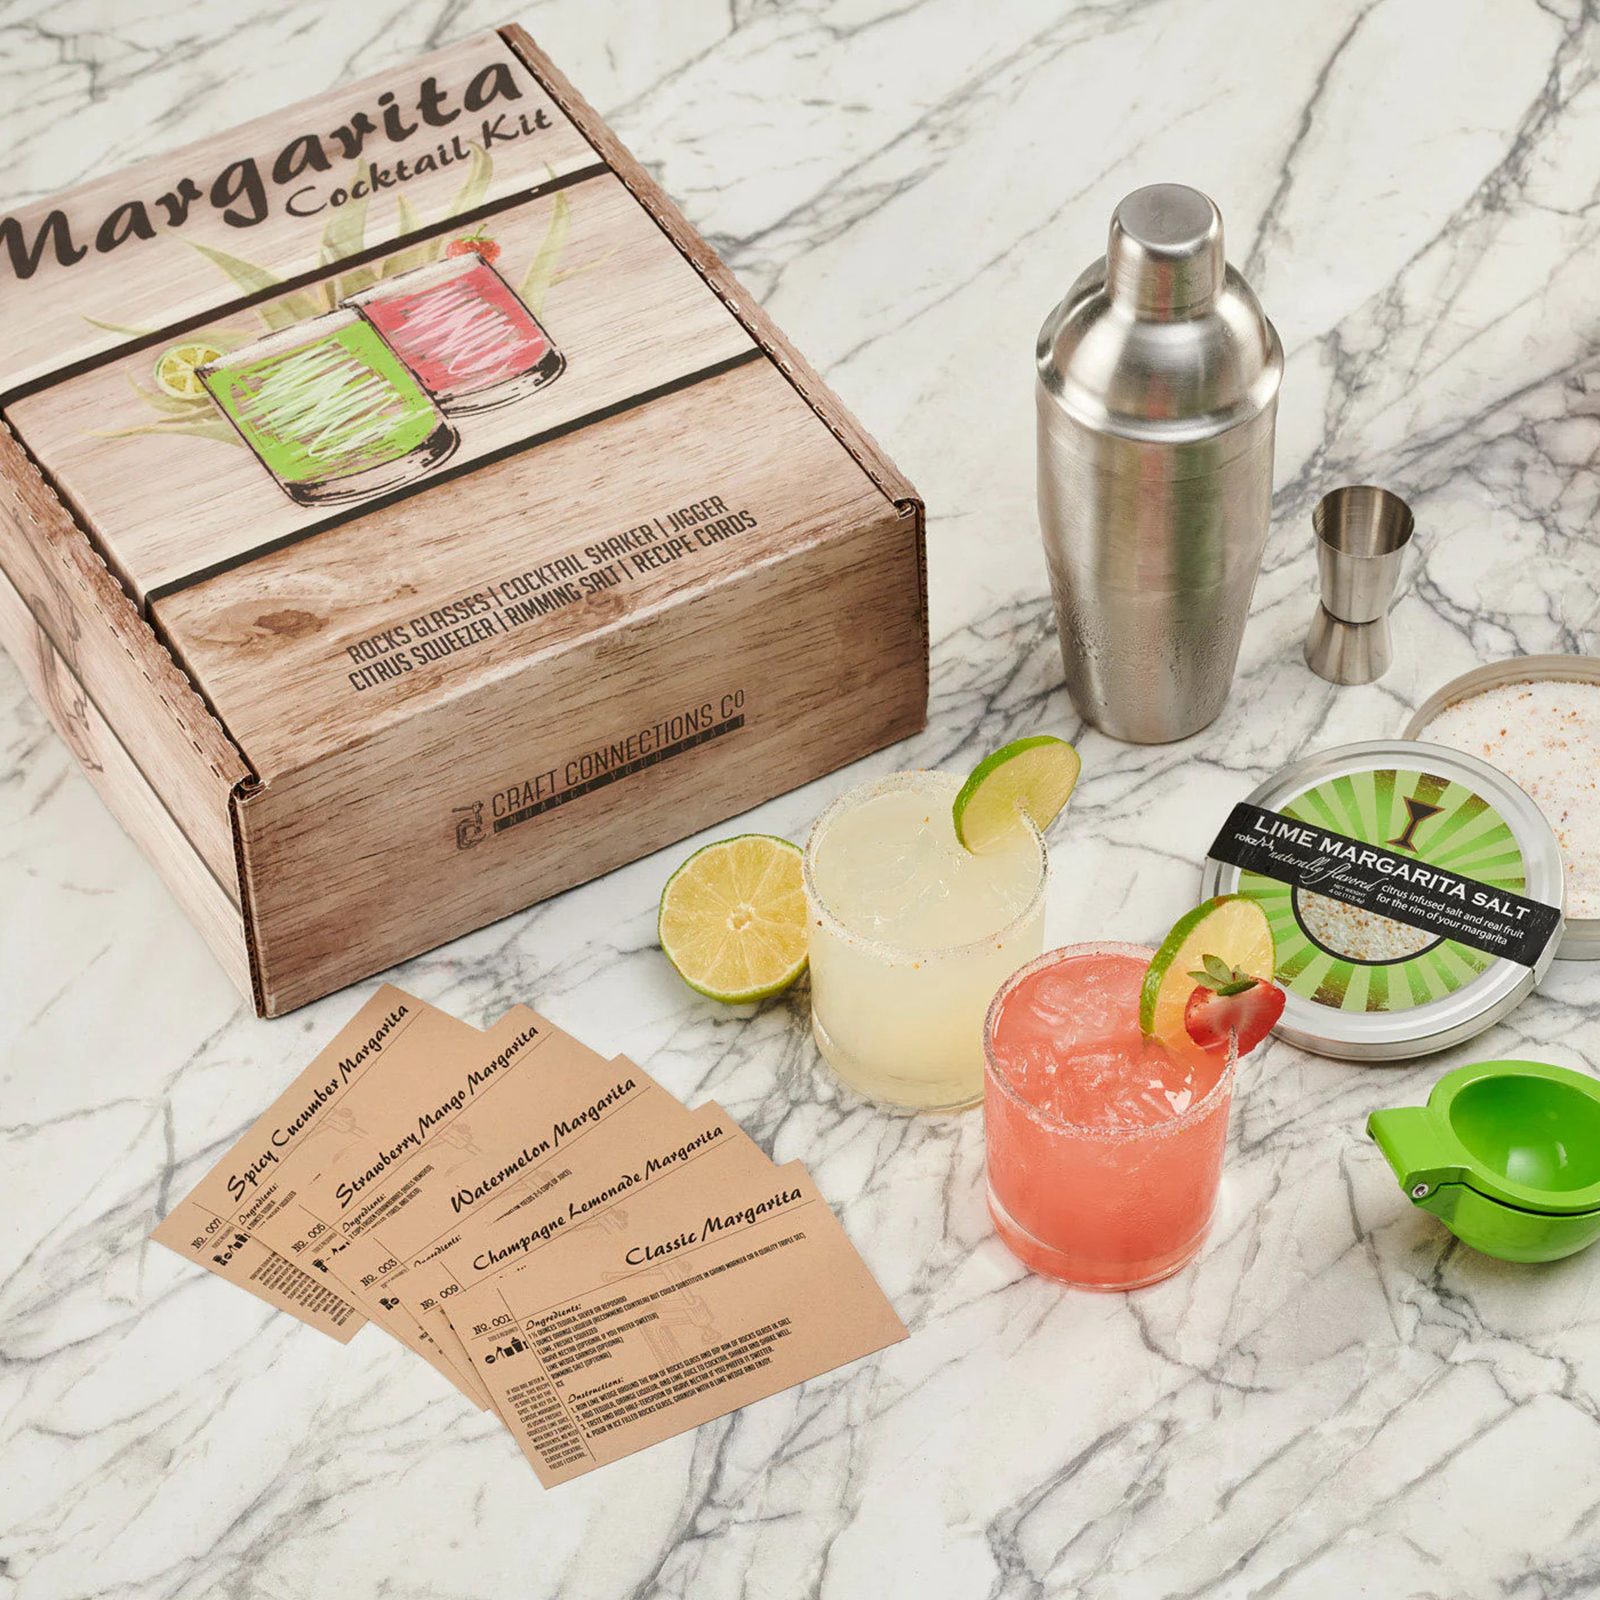 Shop: The 6 Best Cocktail Kits for Easy At-Home Drinks